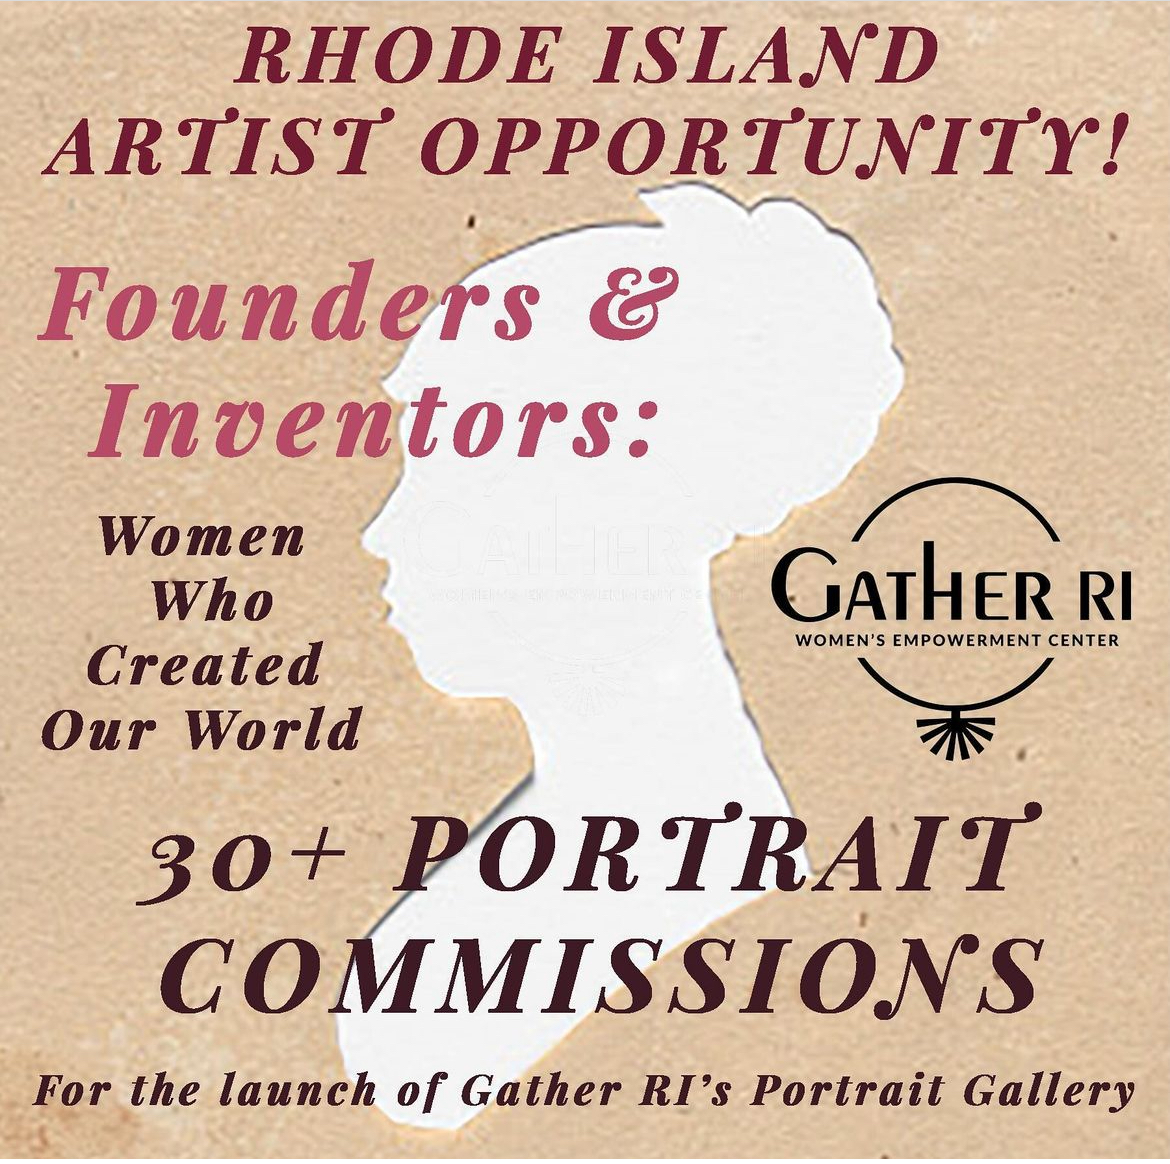 Gather RI Seeks Artist Applications for Portrait Gallery Commissions